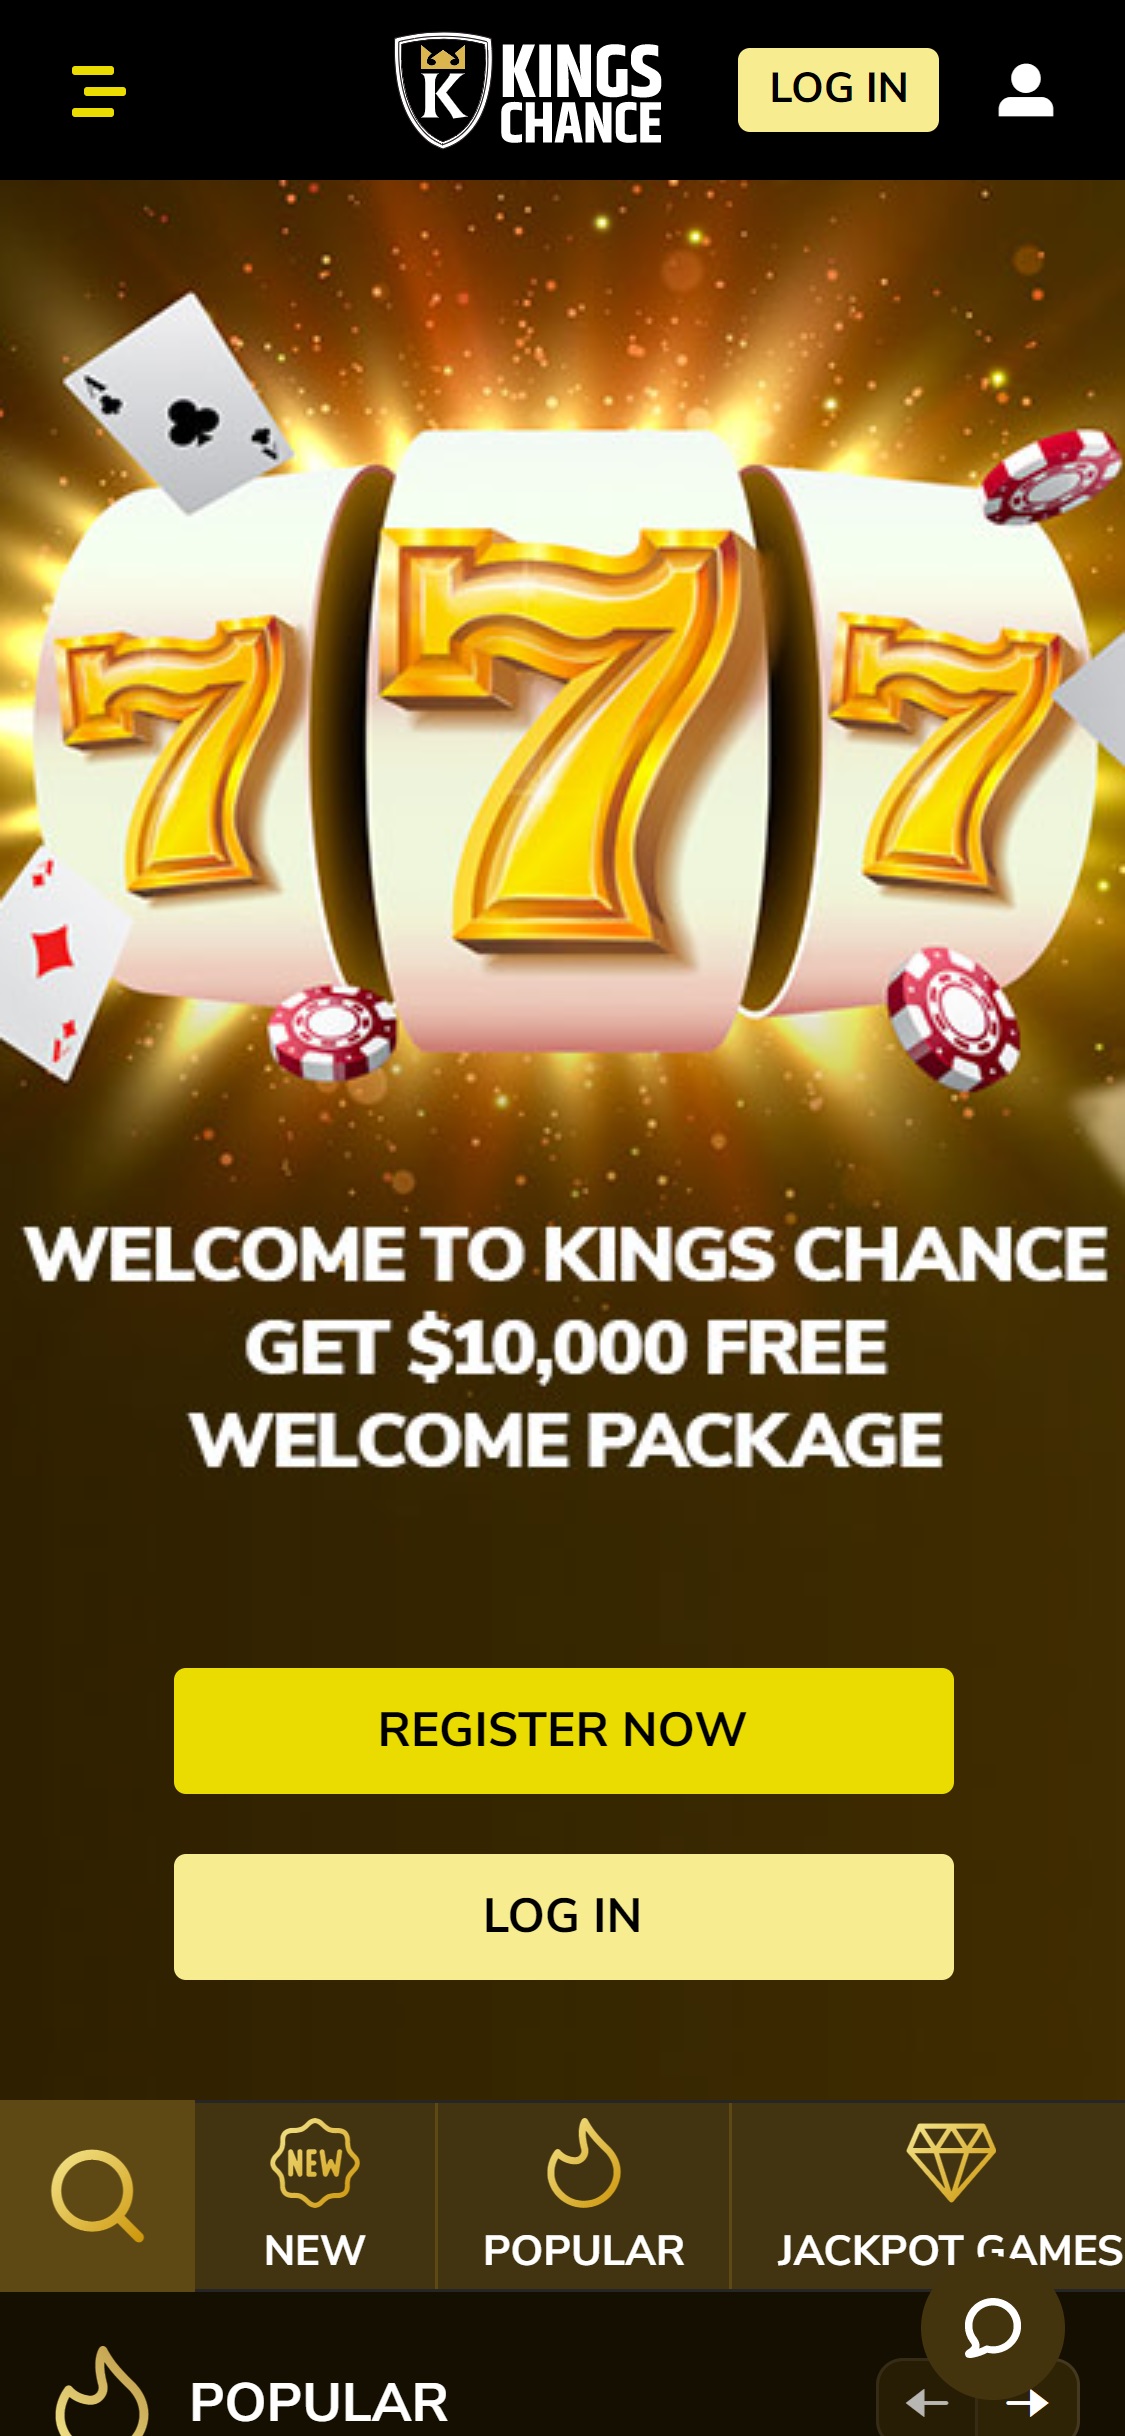 Kings Chance Casino Mobile Review